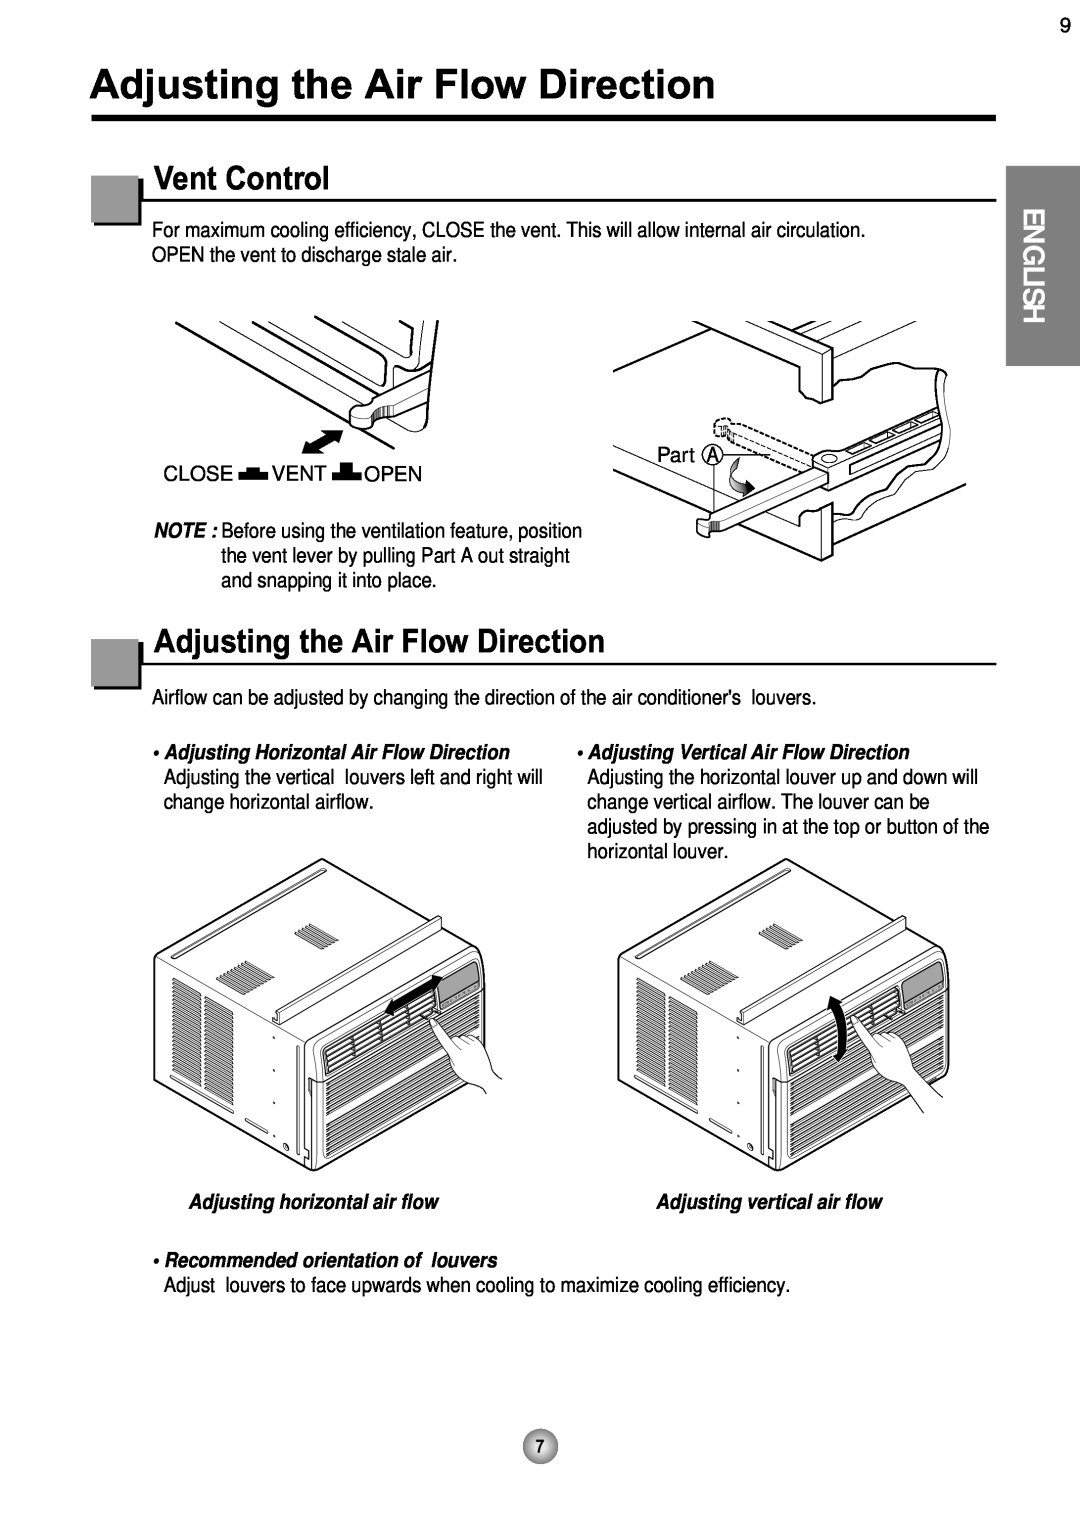 Friedrich CP08 operation manual Adjusting the Air Flow Direction, English, Adjusting Horizontal Air Flow Direction 